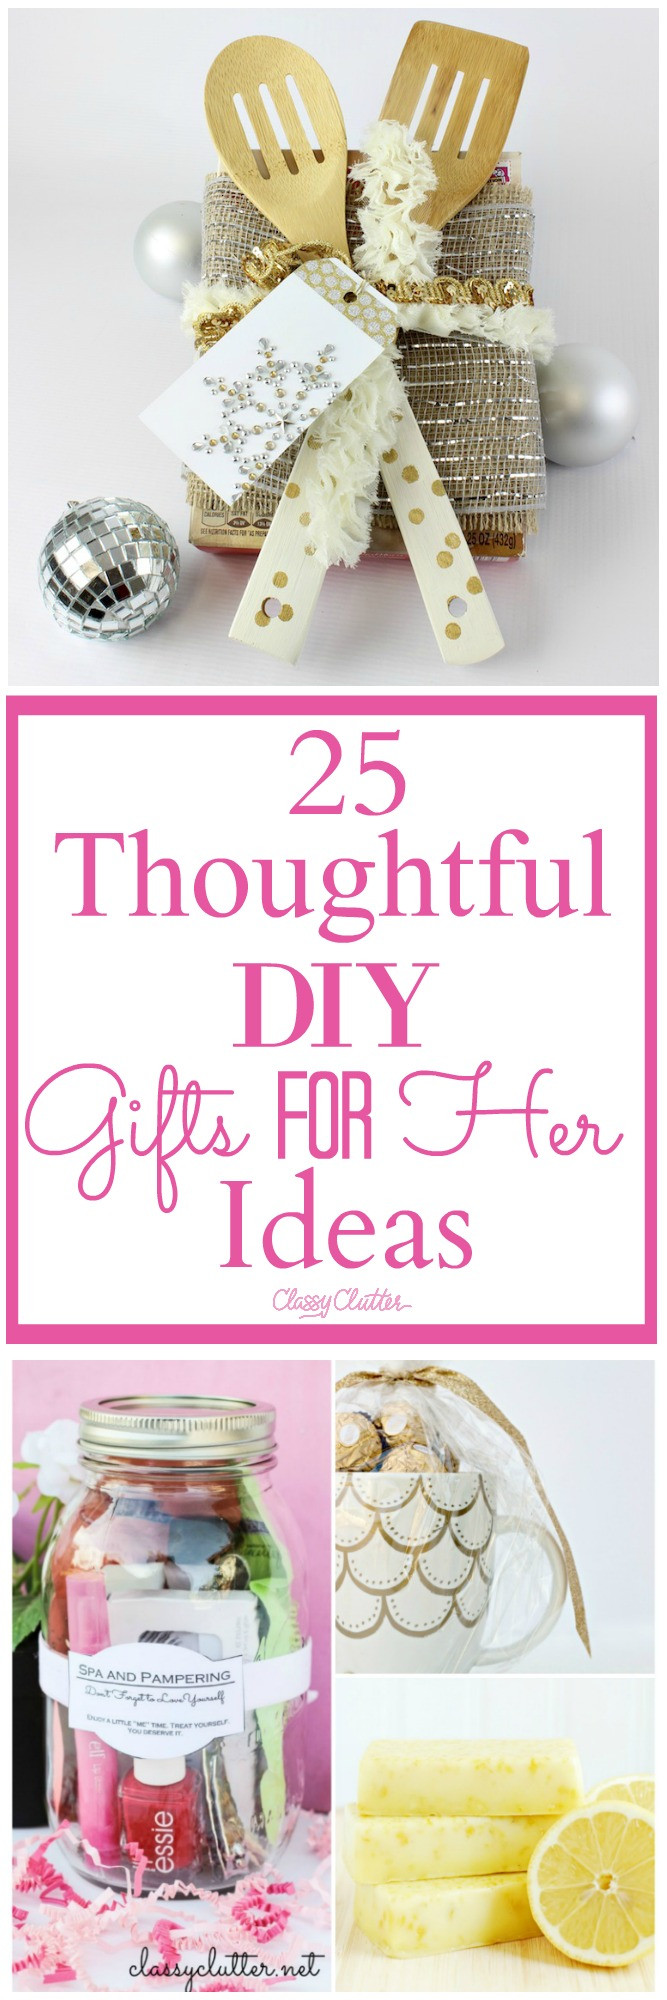 DIY Gift Baskets For Her
 25 Thoughtful DIY Gifts for Her Ideas Classy Clutter